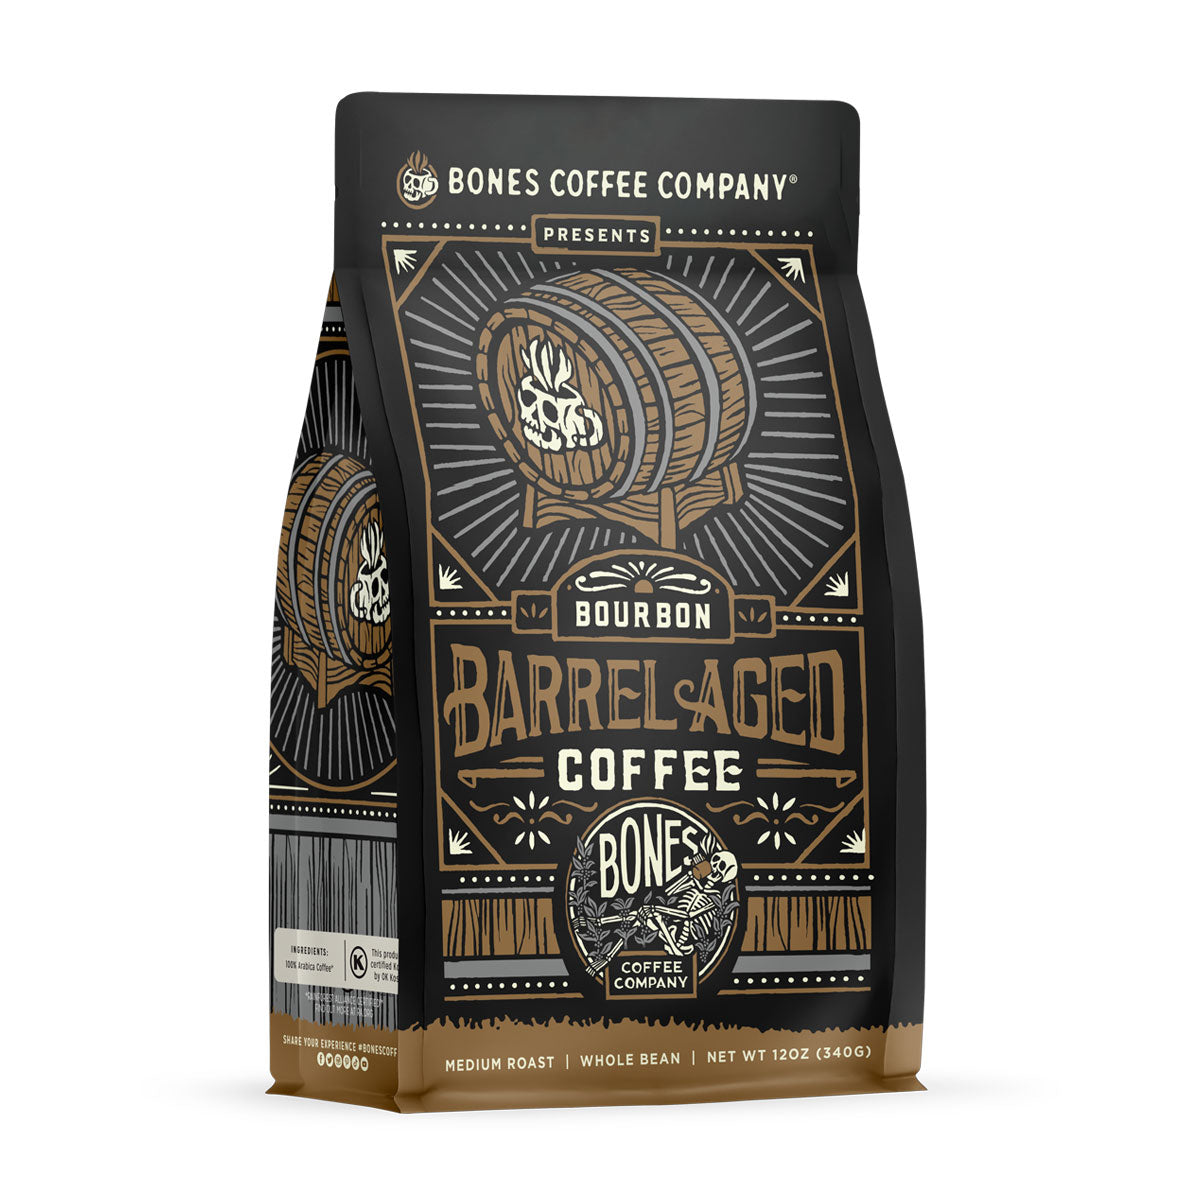 The front of a 12 ounce bag of Bones Coffee Company Bourbon Barrel Aged coffee. There is a barrel with the Bones Coffee Company skull logo on it on the art.